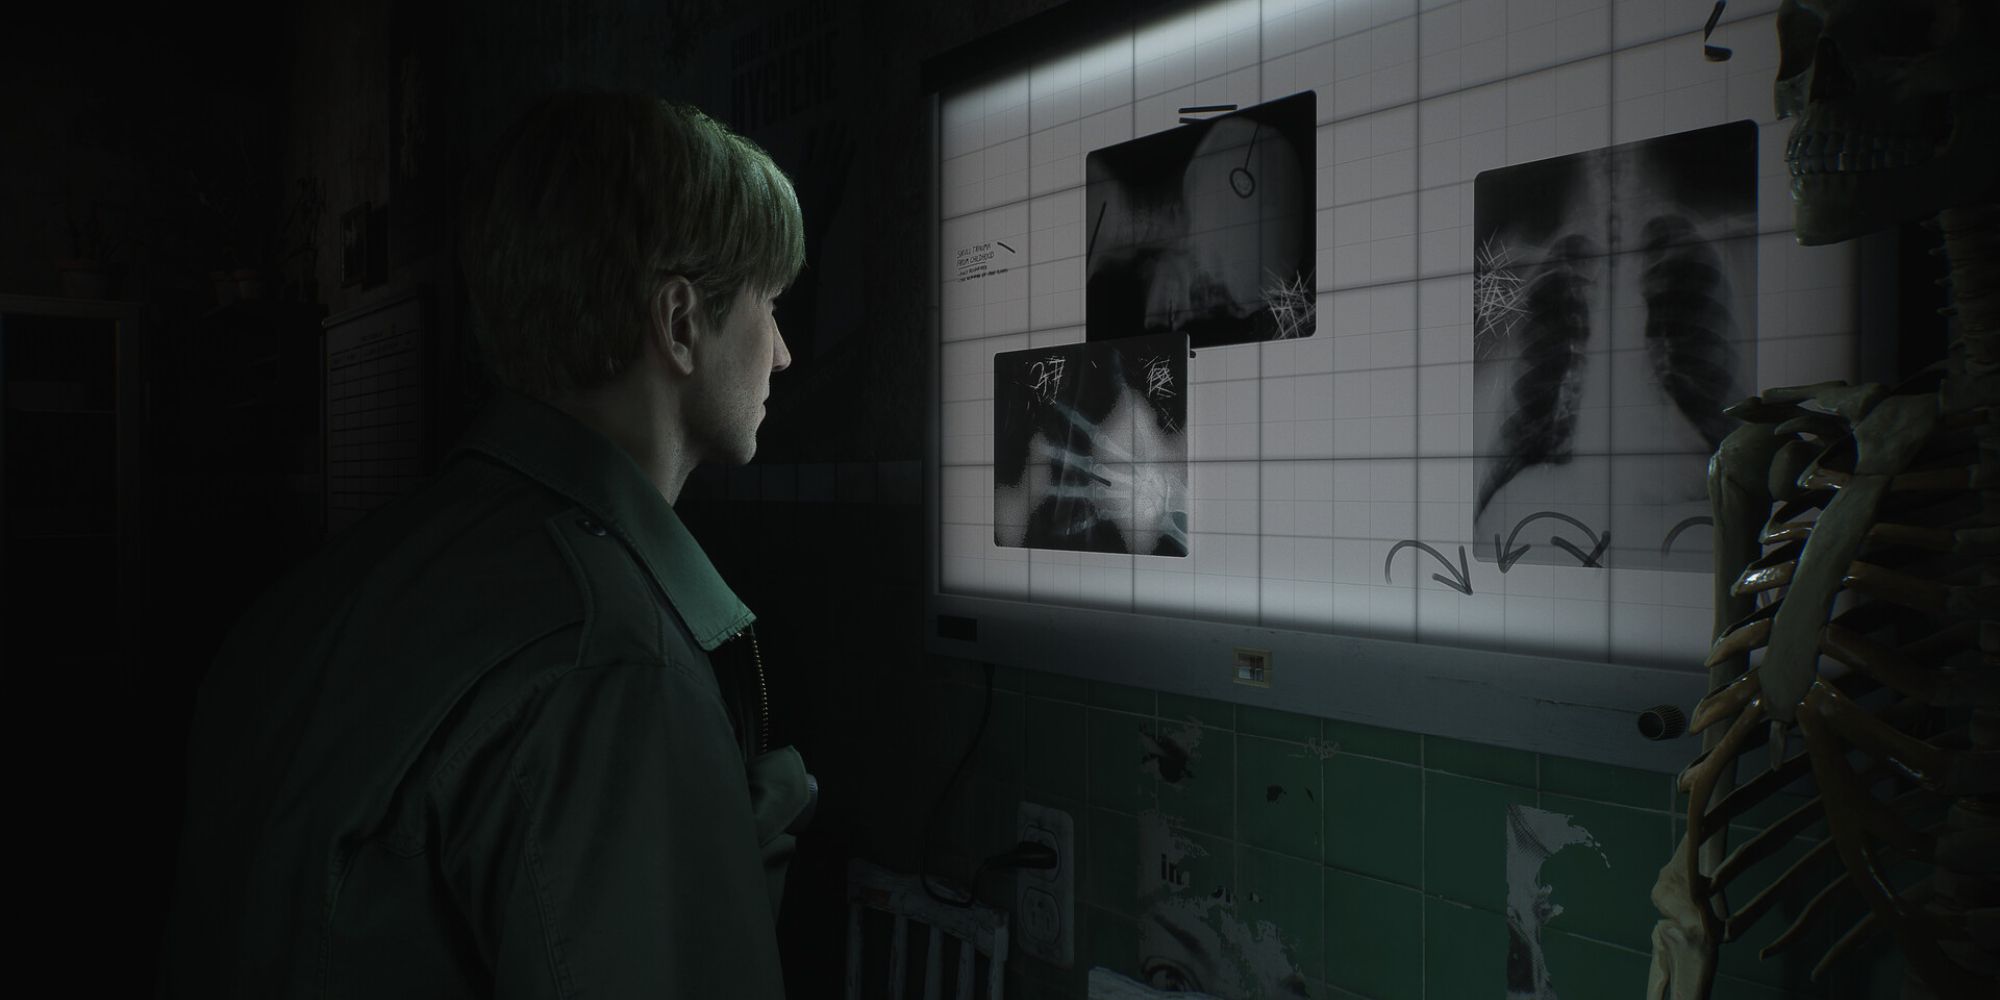 James looking at X-rays in Silent Hill 2